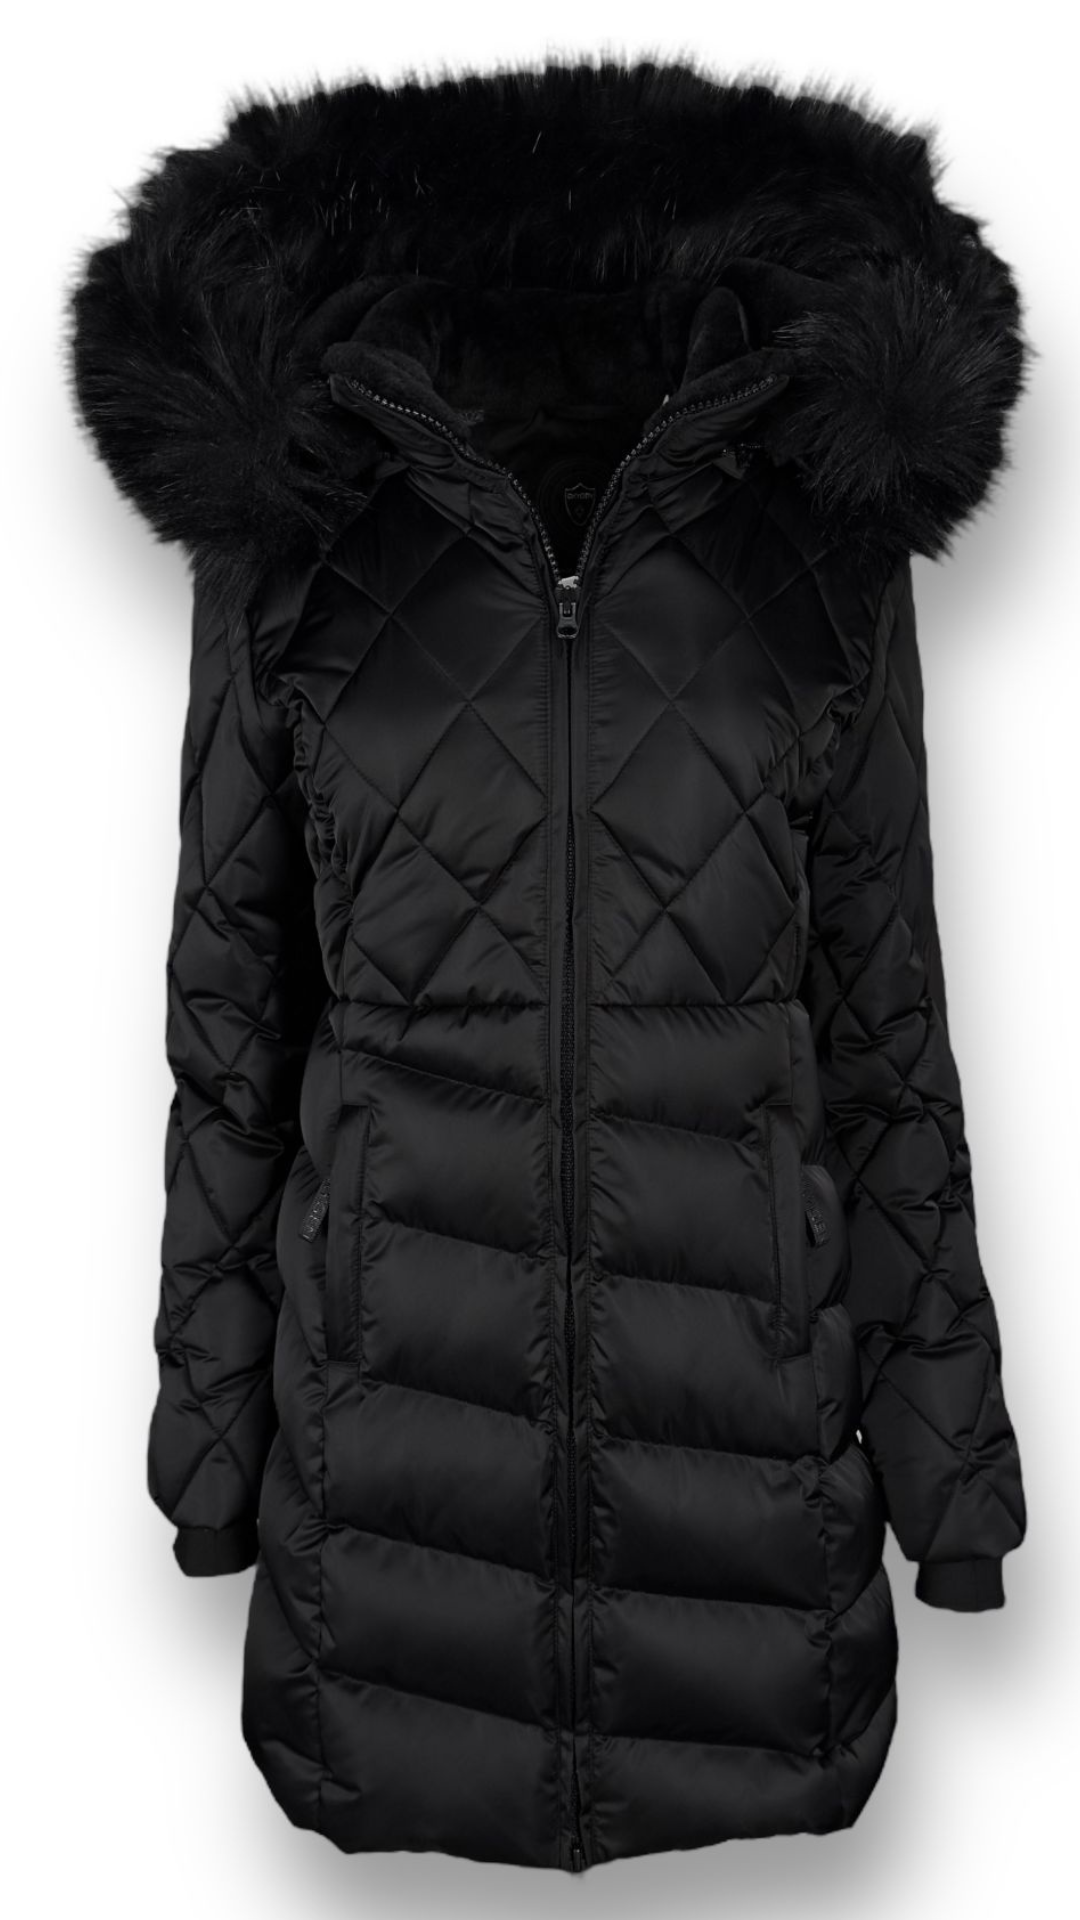 Diagonal & Diamond Quilted 2/3 Length Outerwear. Style OX30-1321